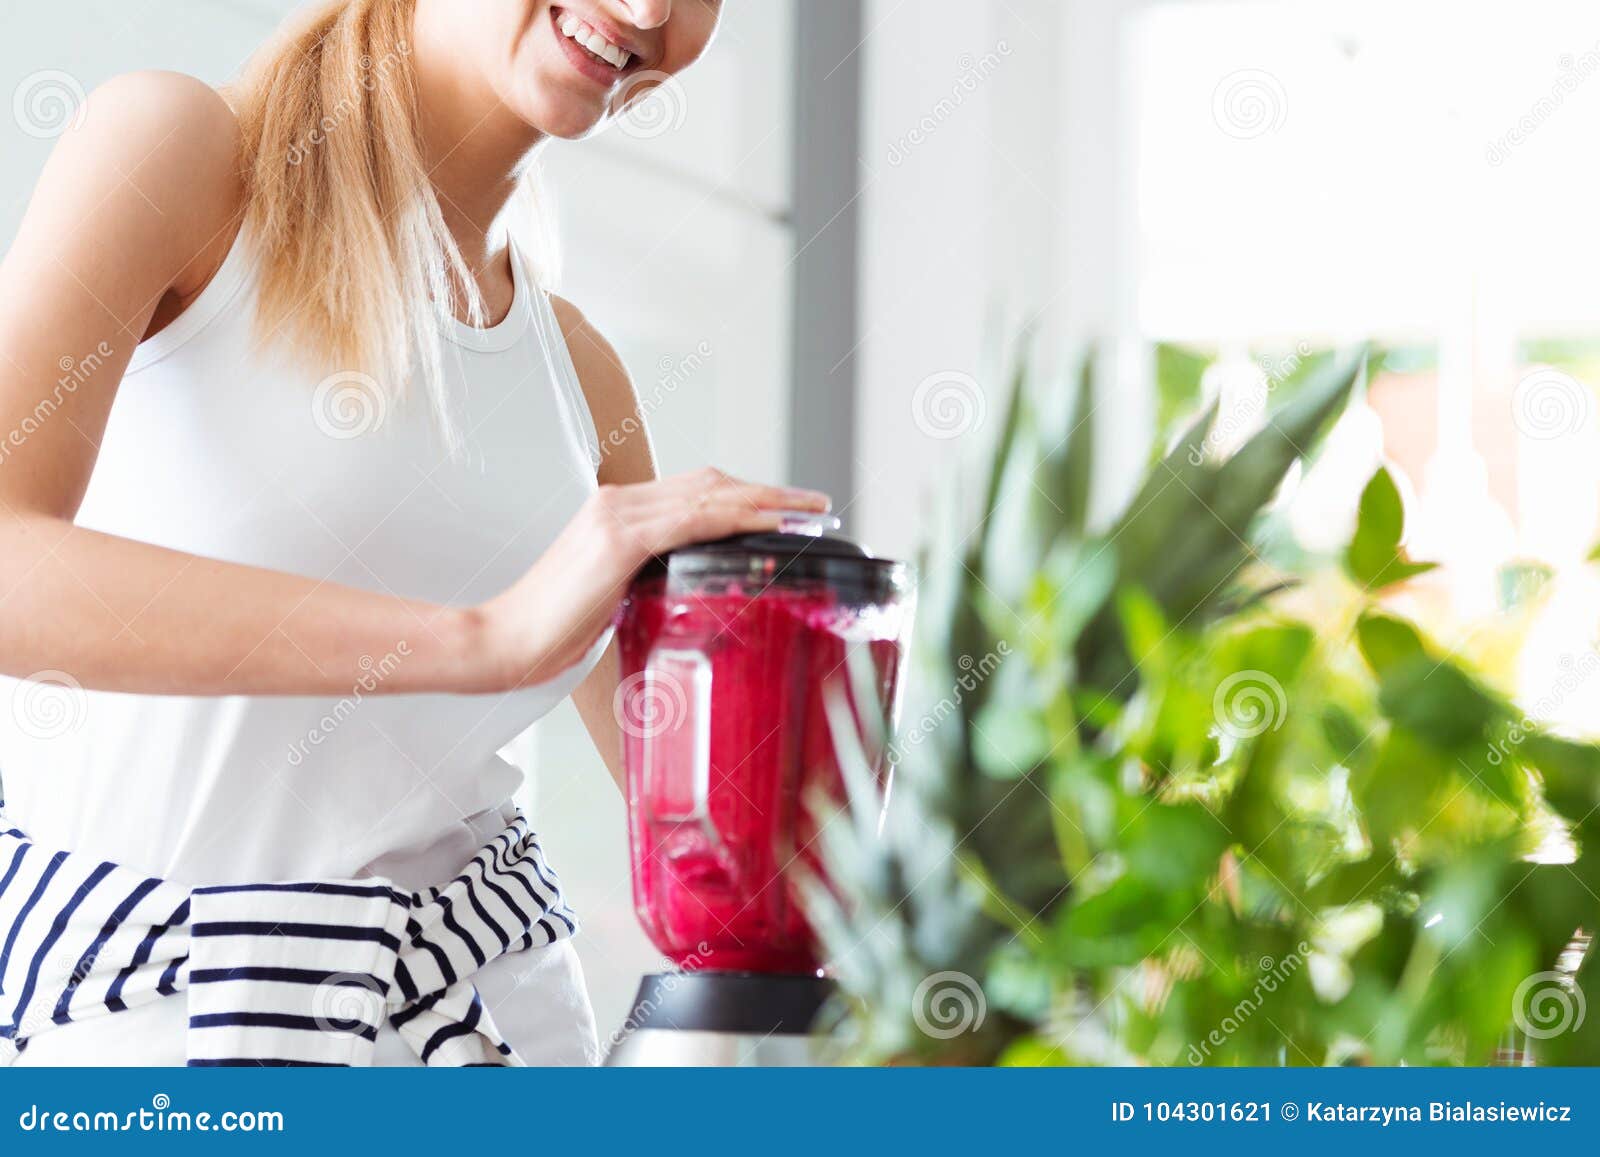 smiling woman blending red smoothie